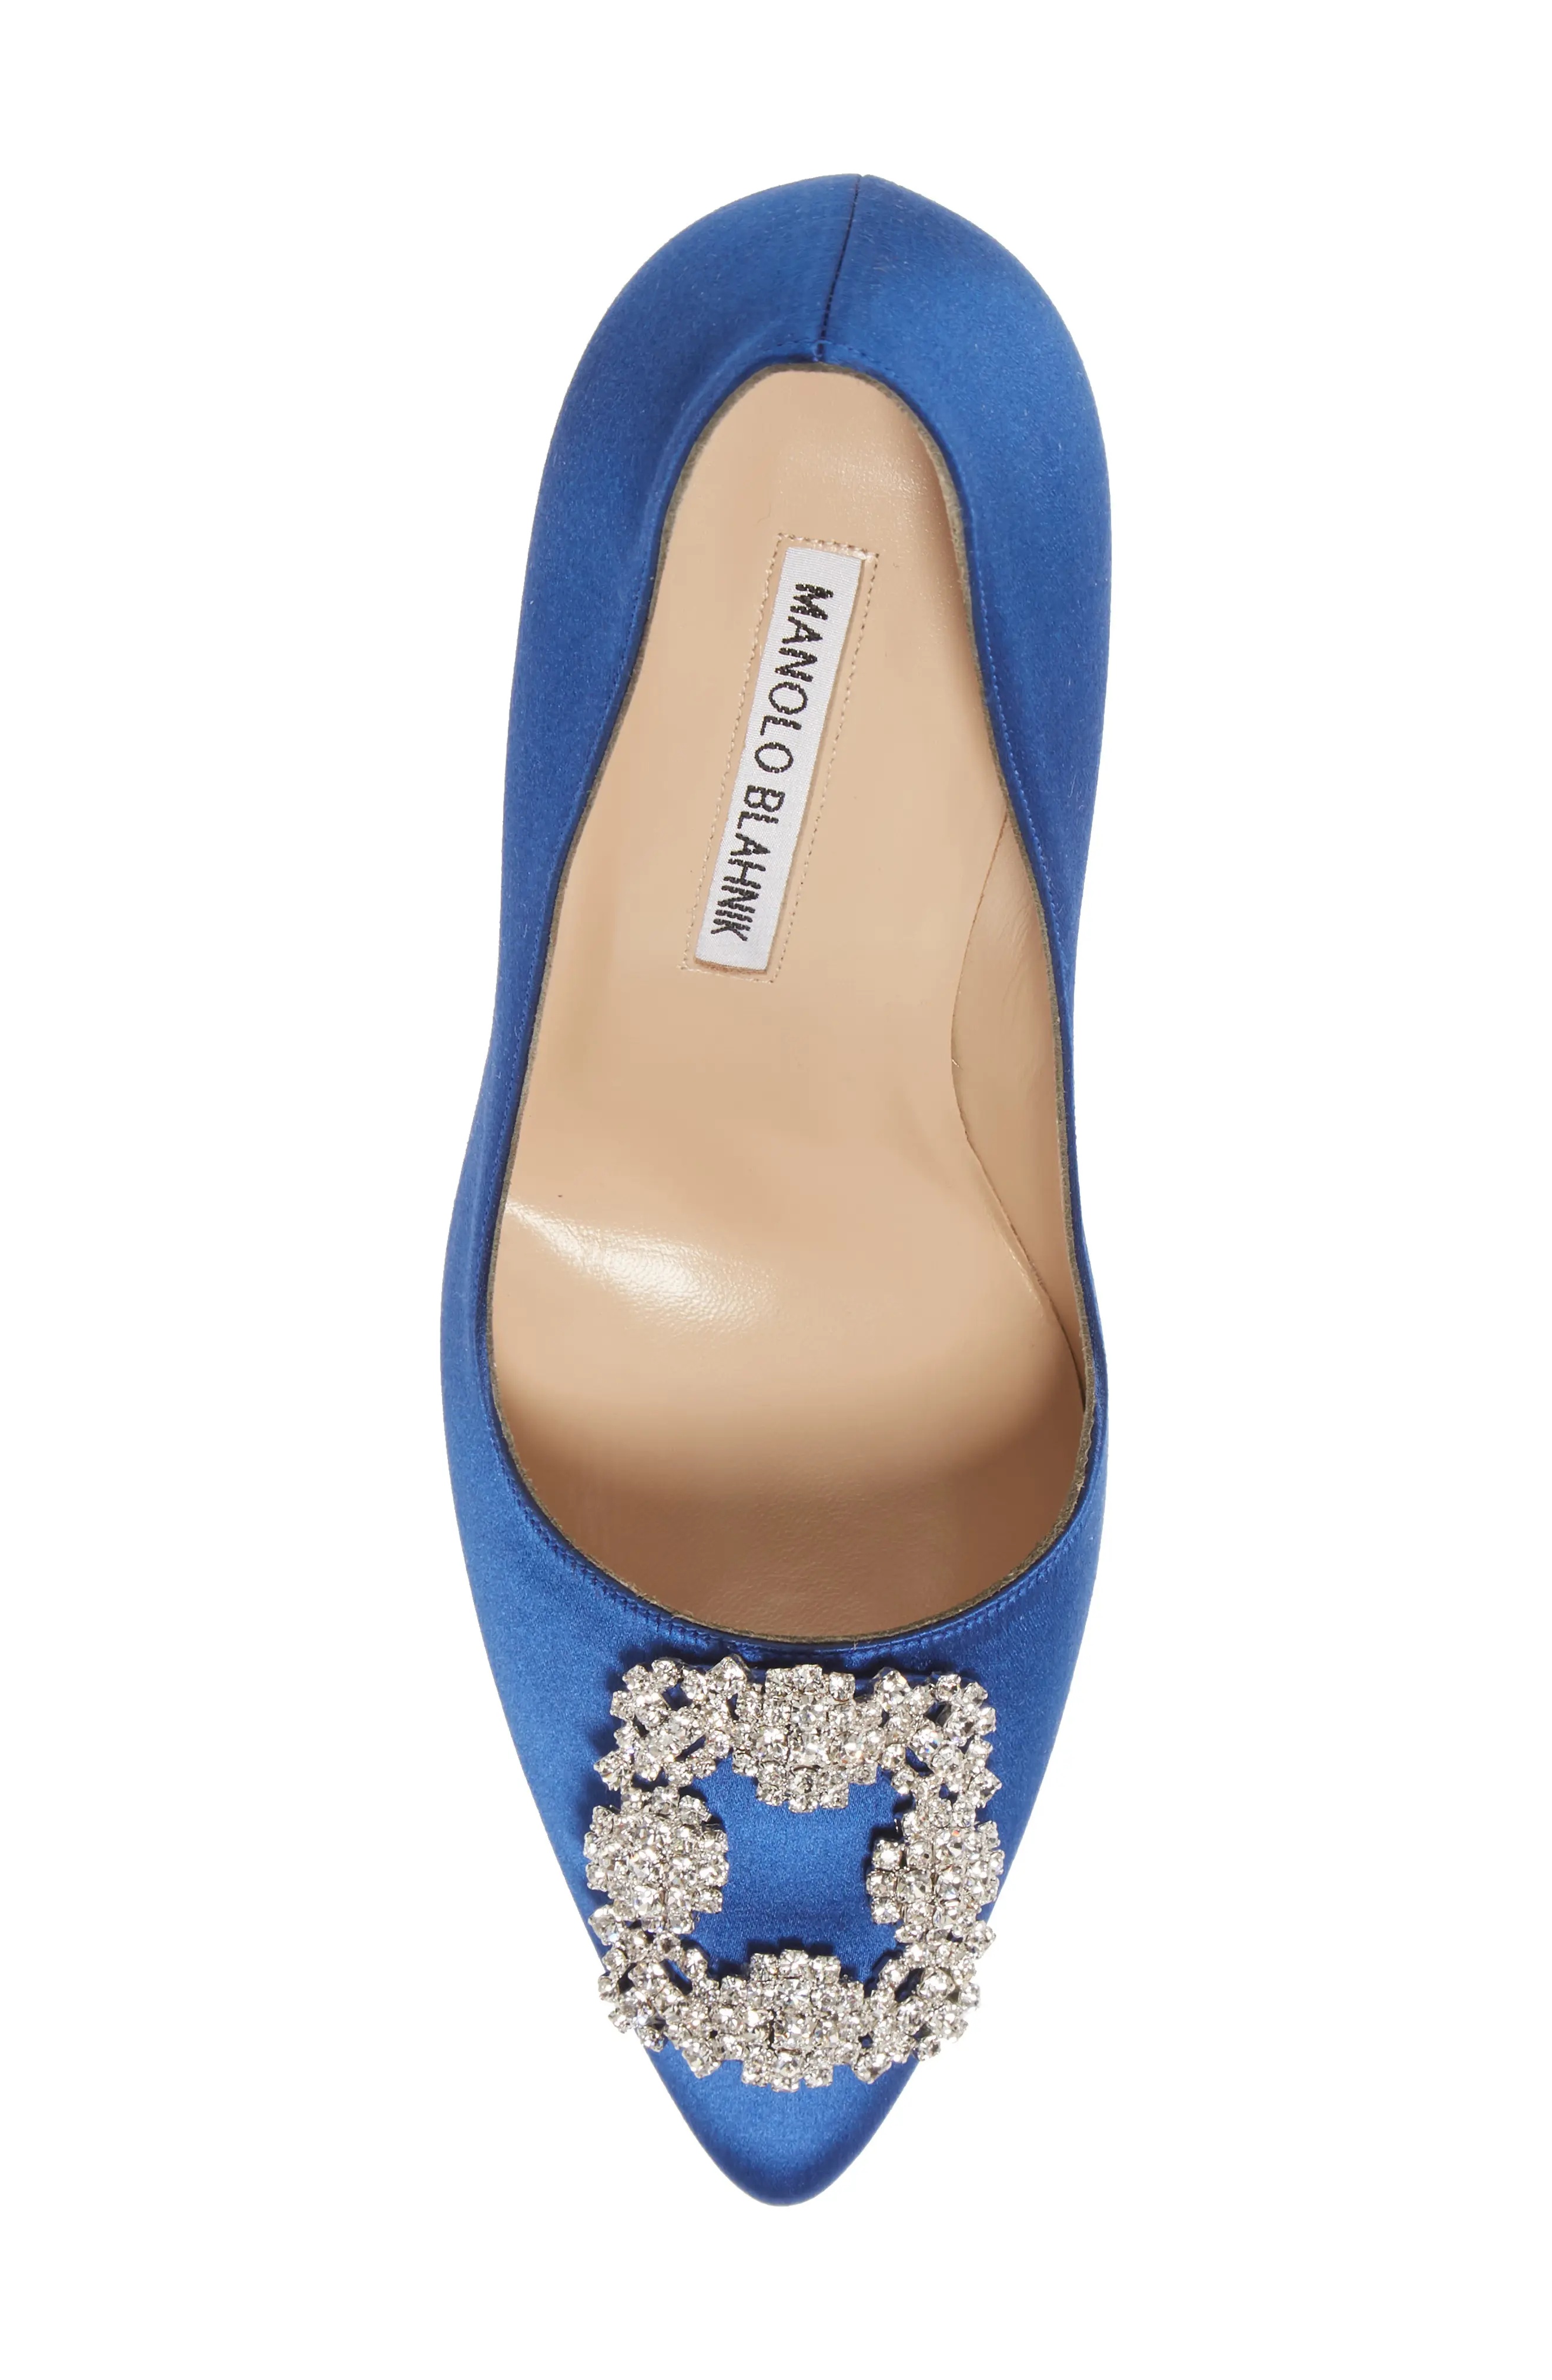 Hangisi Pointed Toe Pump in Blue Satin/Clear - 5